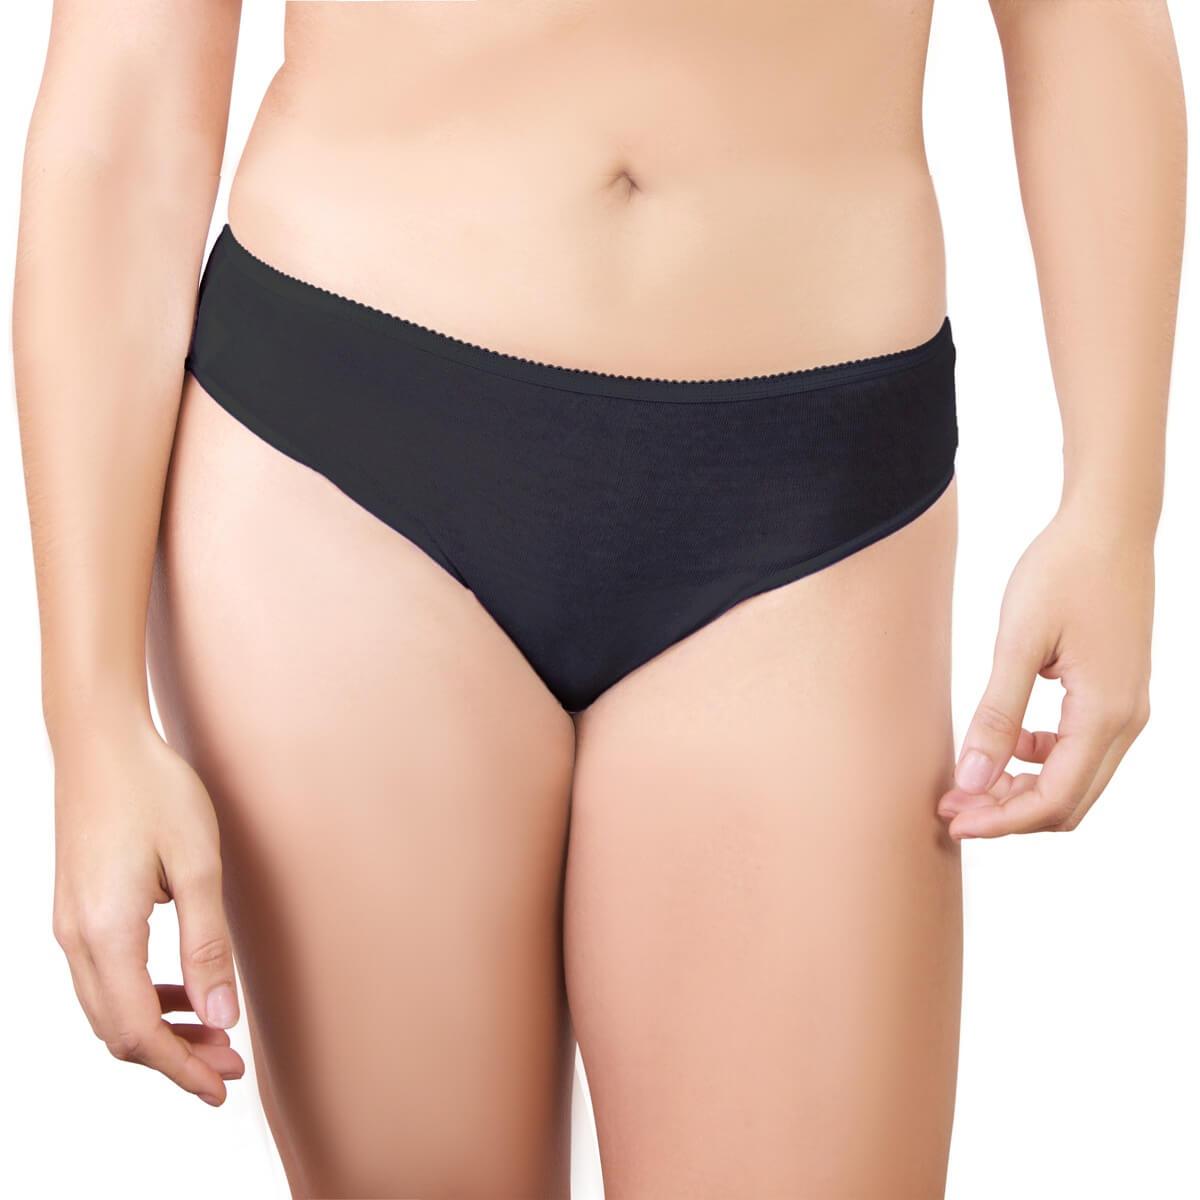 Disposable black travel underwear. Cotton knickers briefs and panties 5pcs